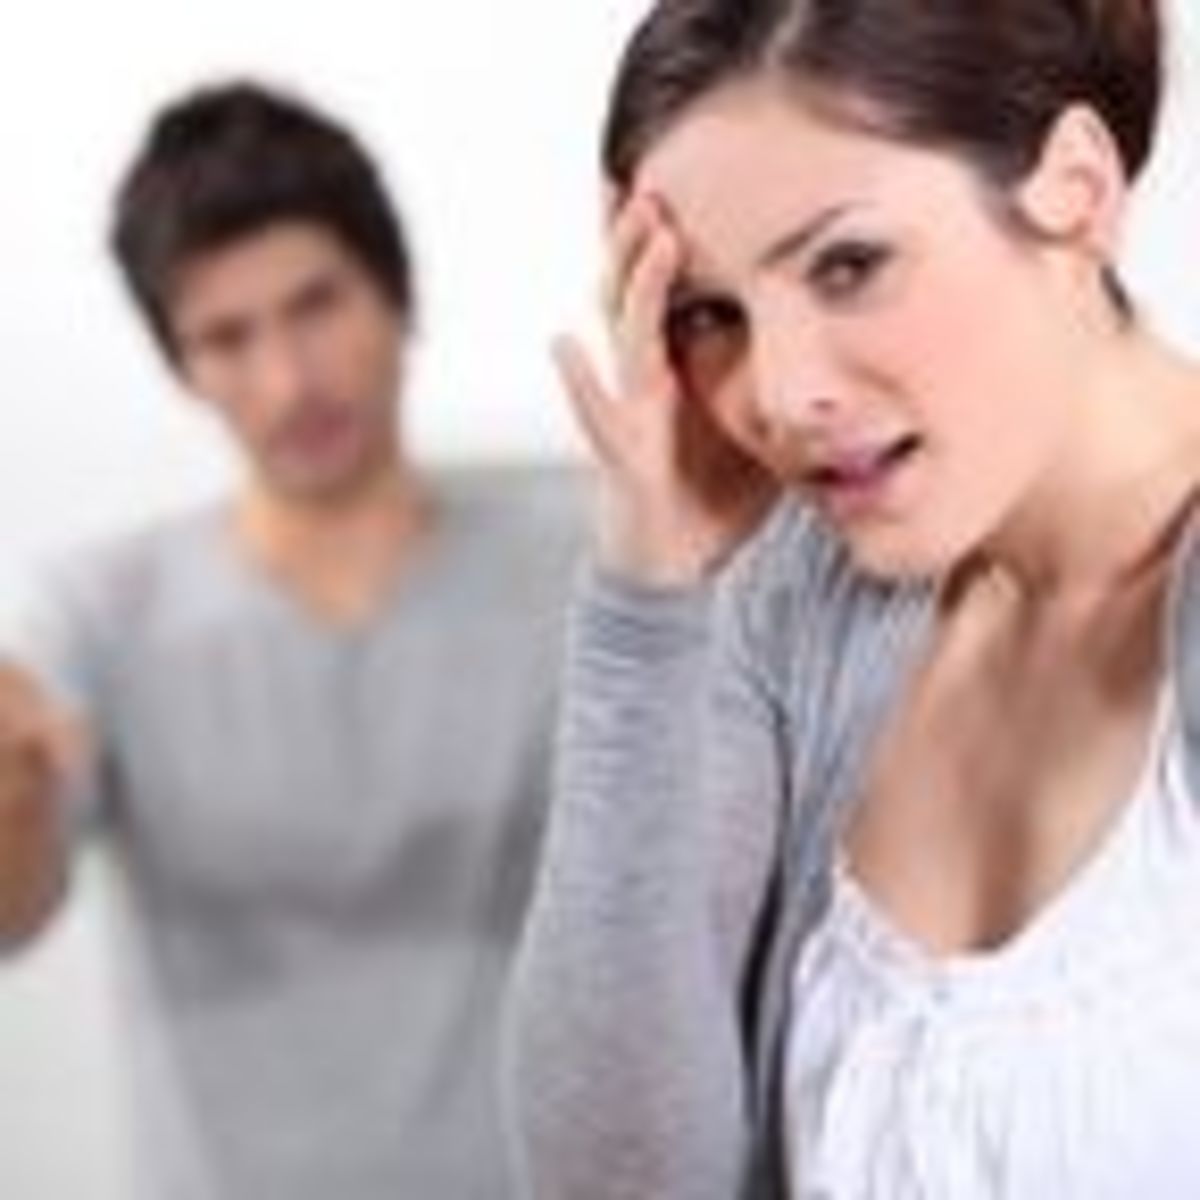 Brother Takes Advantage Of Out Of Control Sister - 7 Stages of Gaslighting in a Relationship | Psychology Today